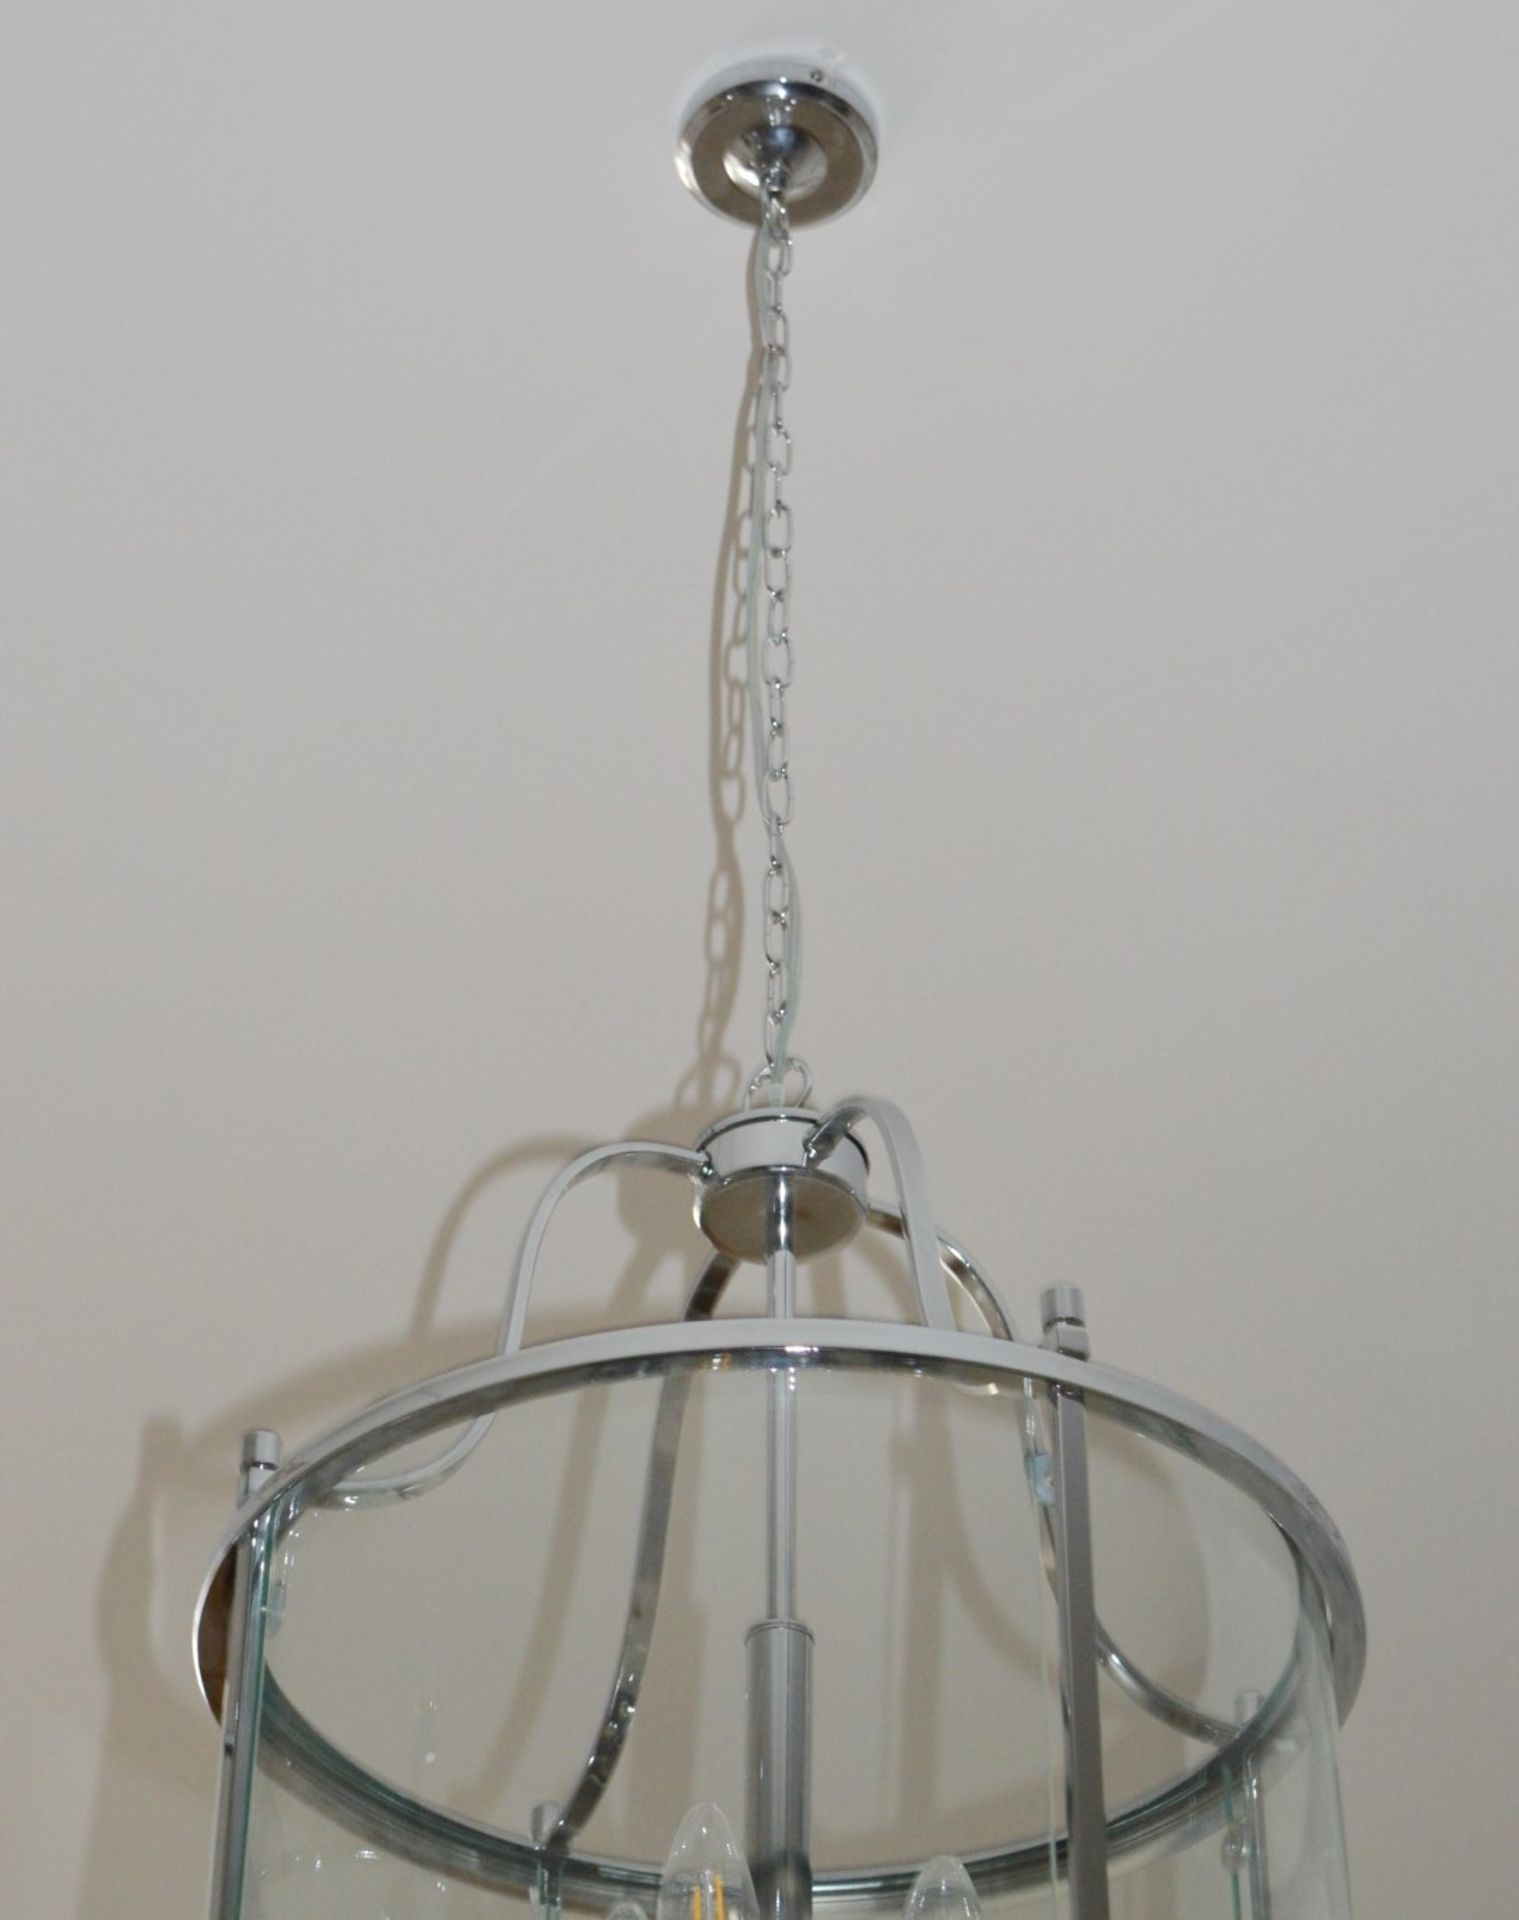 1 x Victorian Lantern Chrome 8-Light Ceiling Fitting With Clear Glass Panels - RRP £576.00 - Image 5 of 5